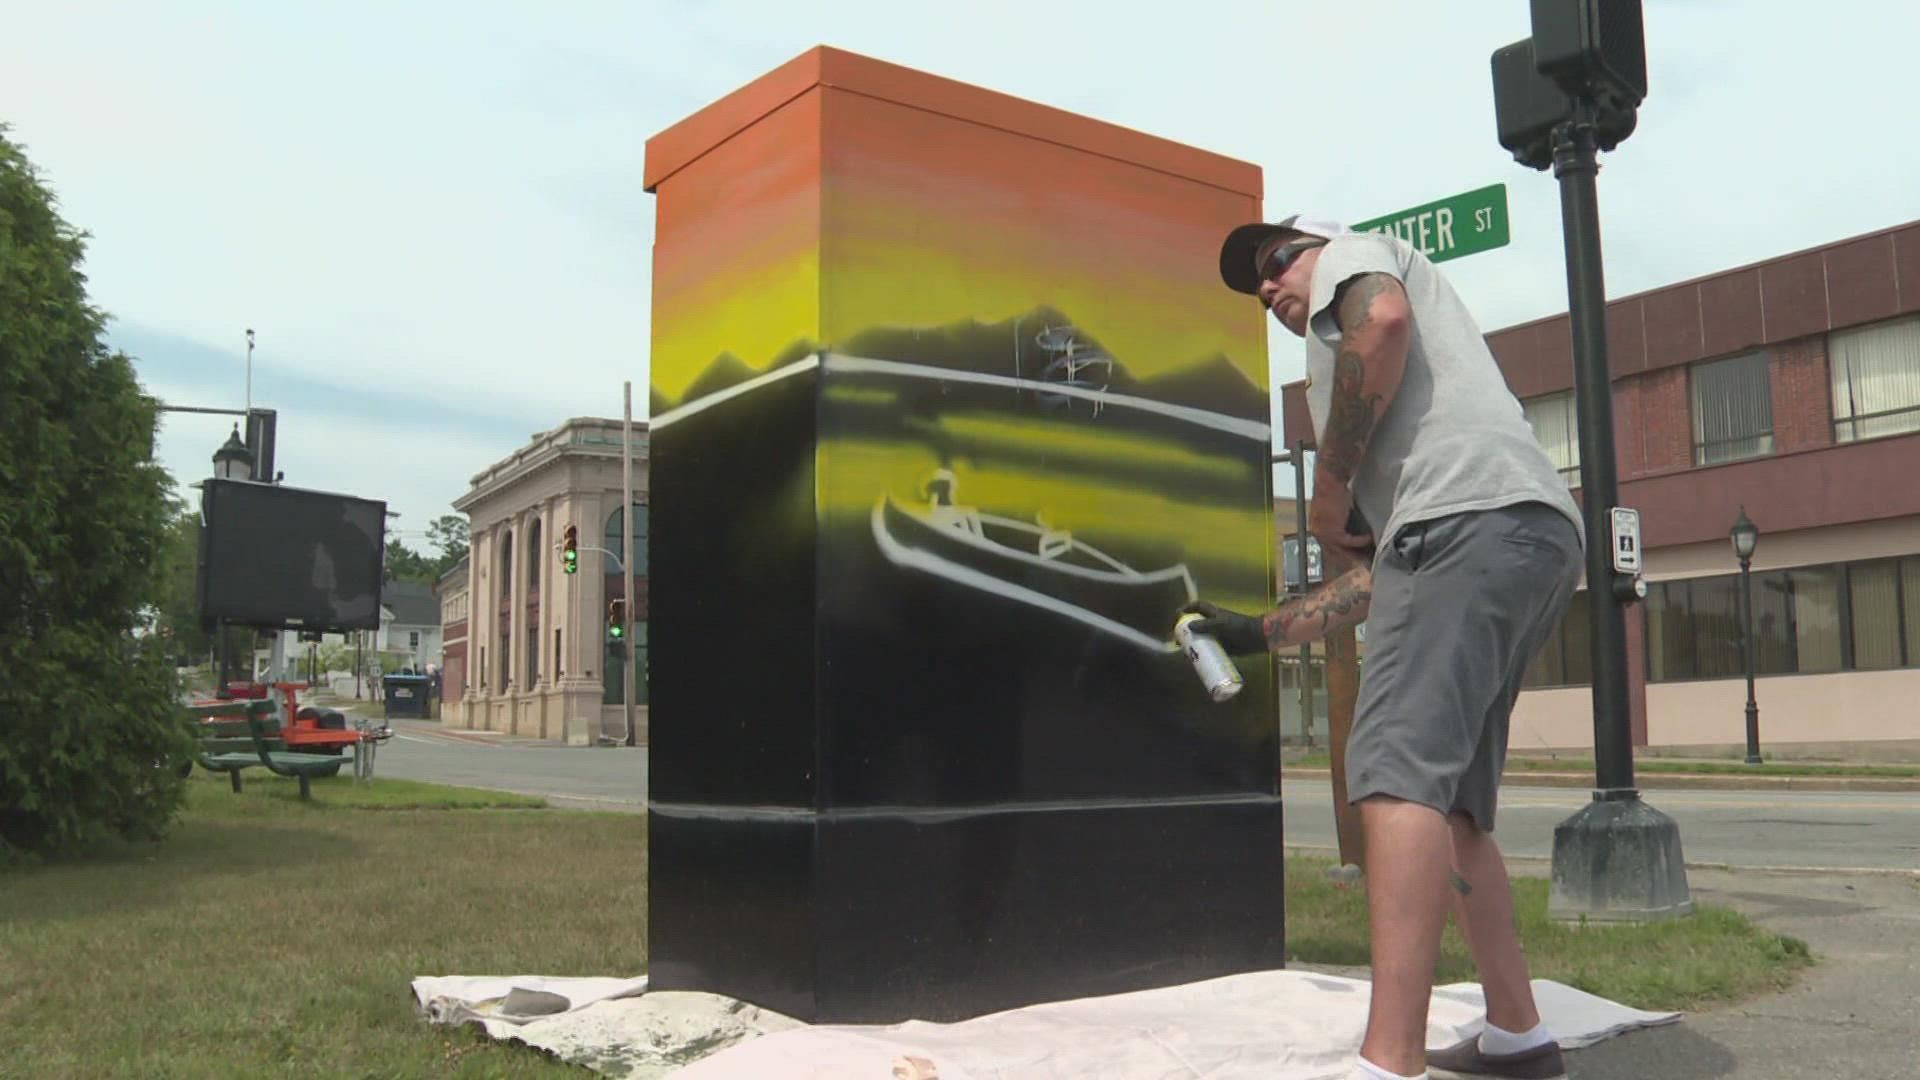 Two electrical boxes in Peace Pole Park get a colorful makeover.